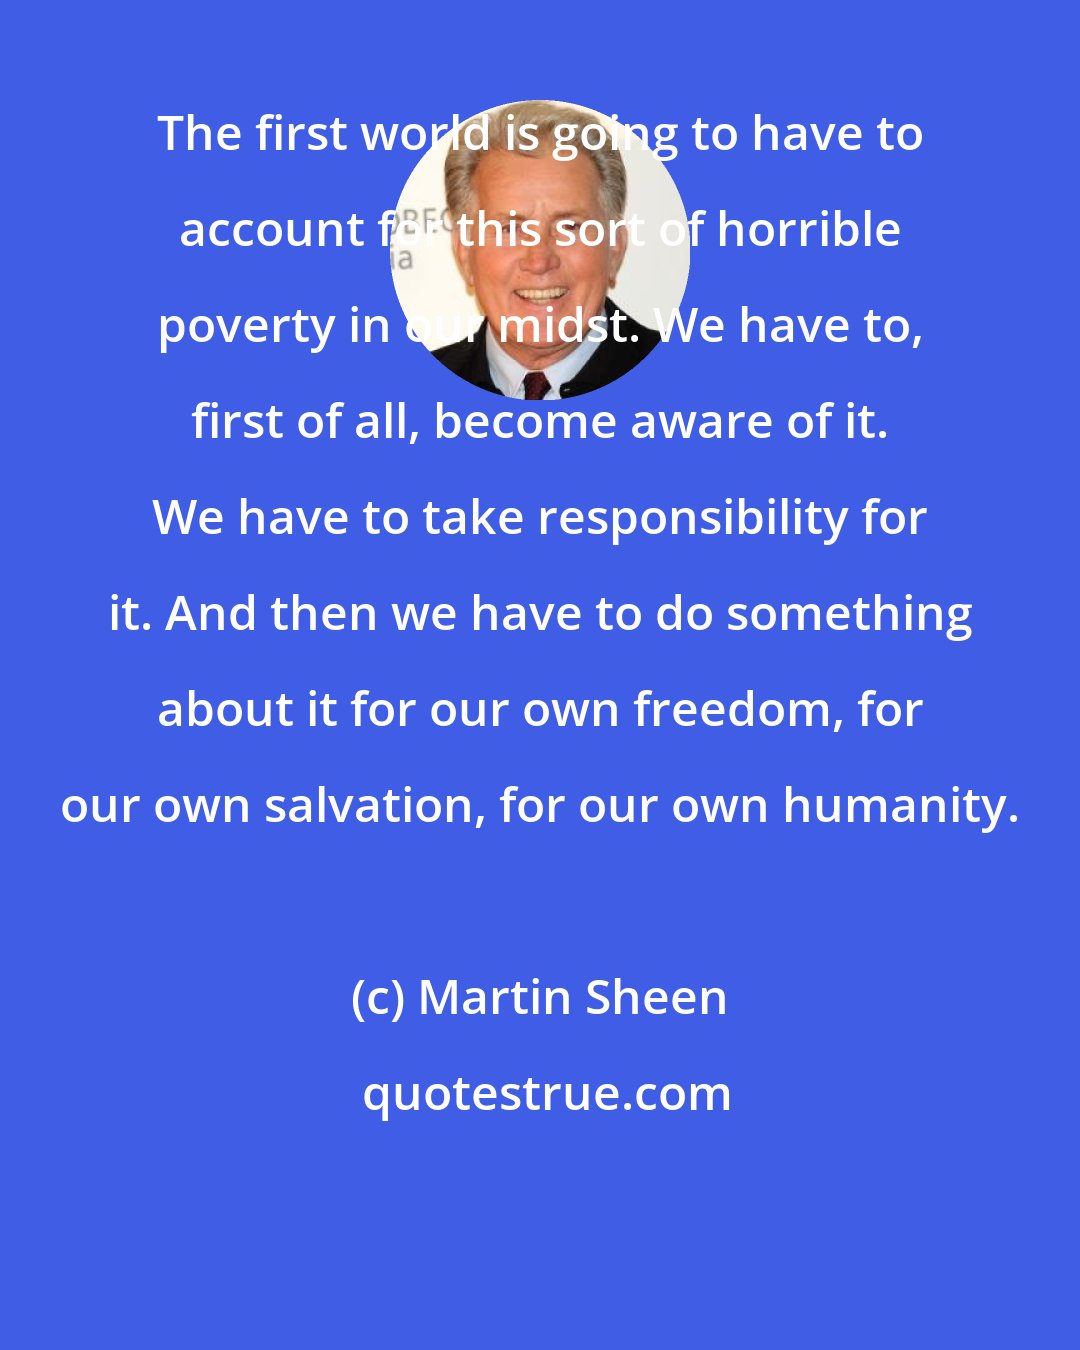 Martin Sheen: The first world is going to have to account for this sort of horrible poverty in our midst. We have to, first of all, become aware of it. We have to take responsibility for it. And then we have to do something about it for our own freedom, for our own salvation, for our own humanity.